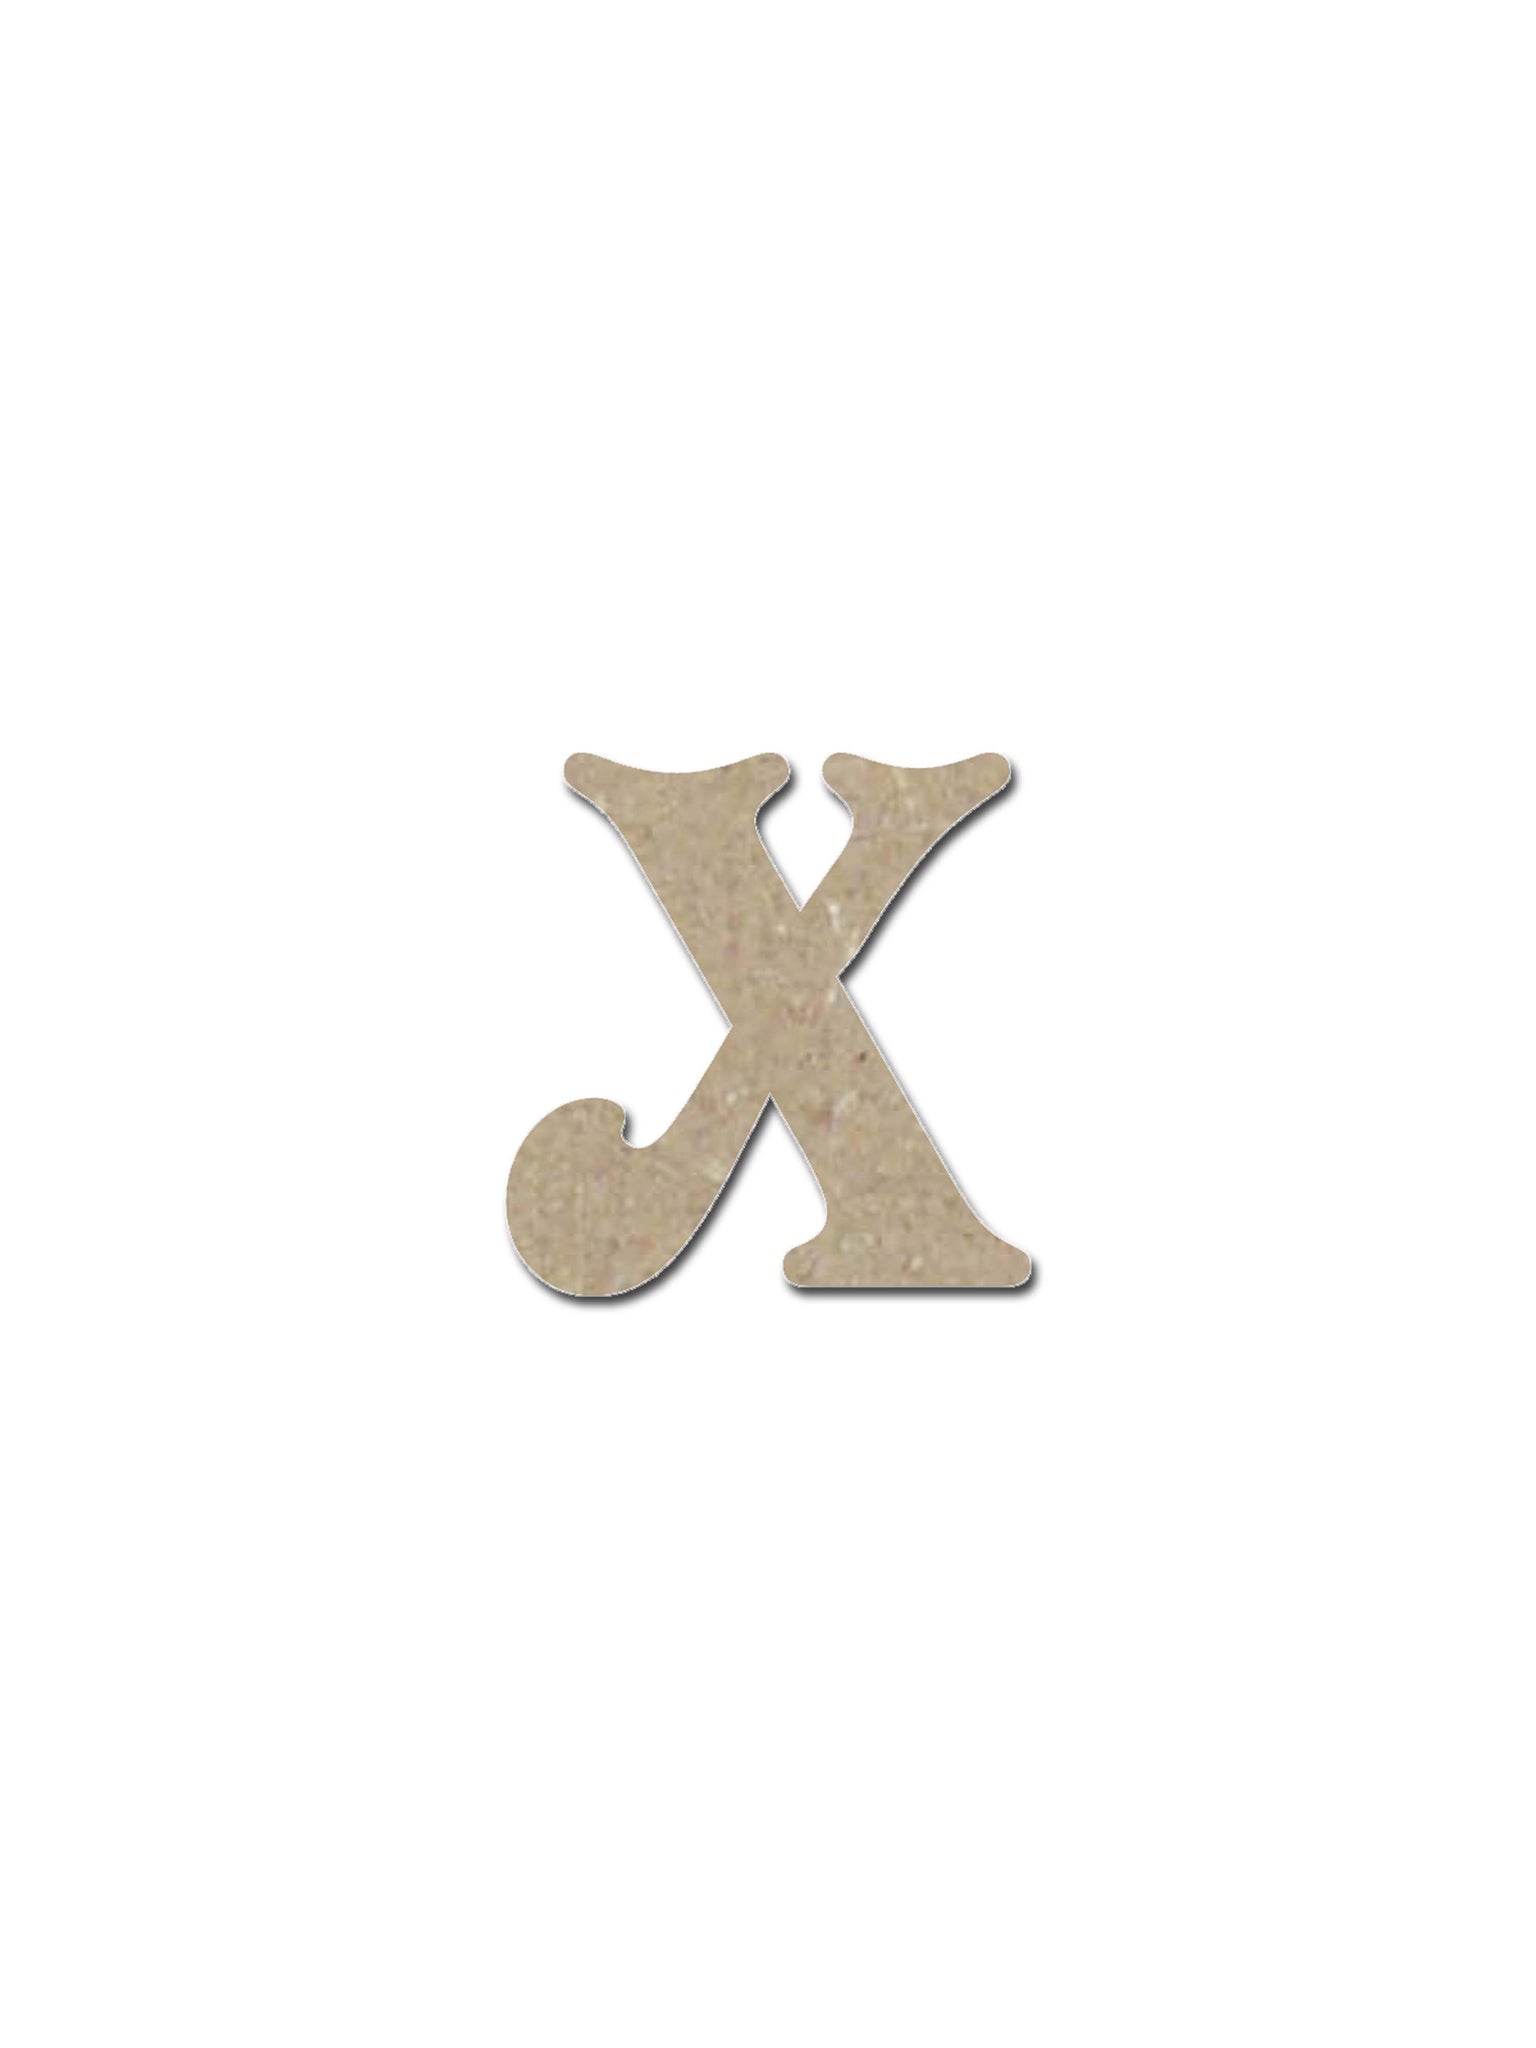 Wooden Letters MDF Unfinished Unpainted DIY Crafts 6 Inch Tall